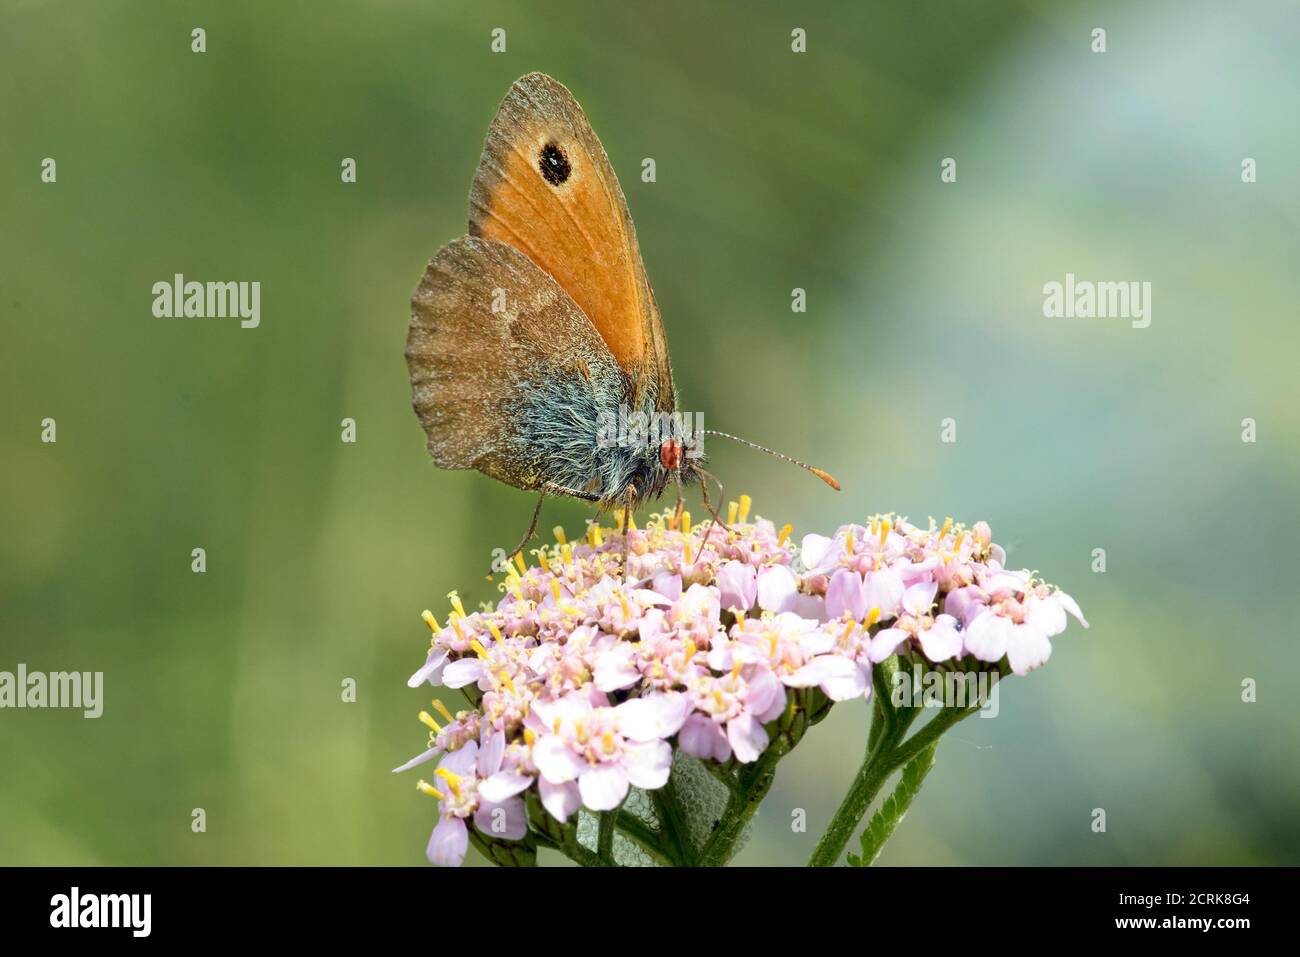 A butterfly posed on a globe candytuft Stock Photo